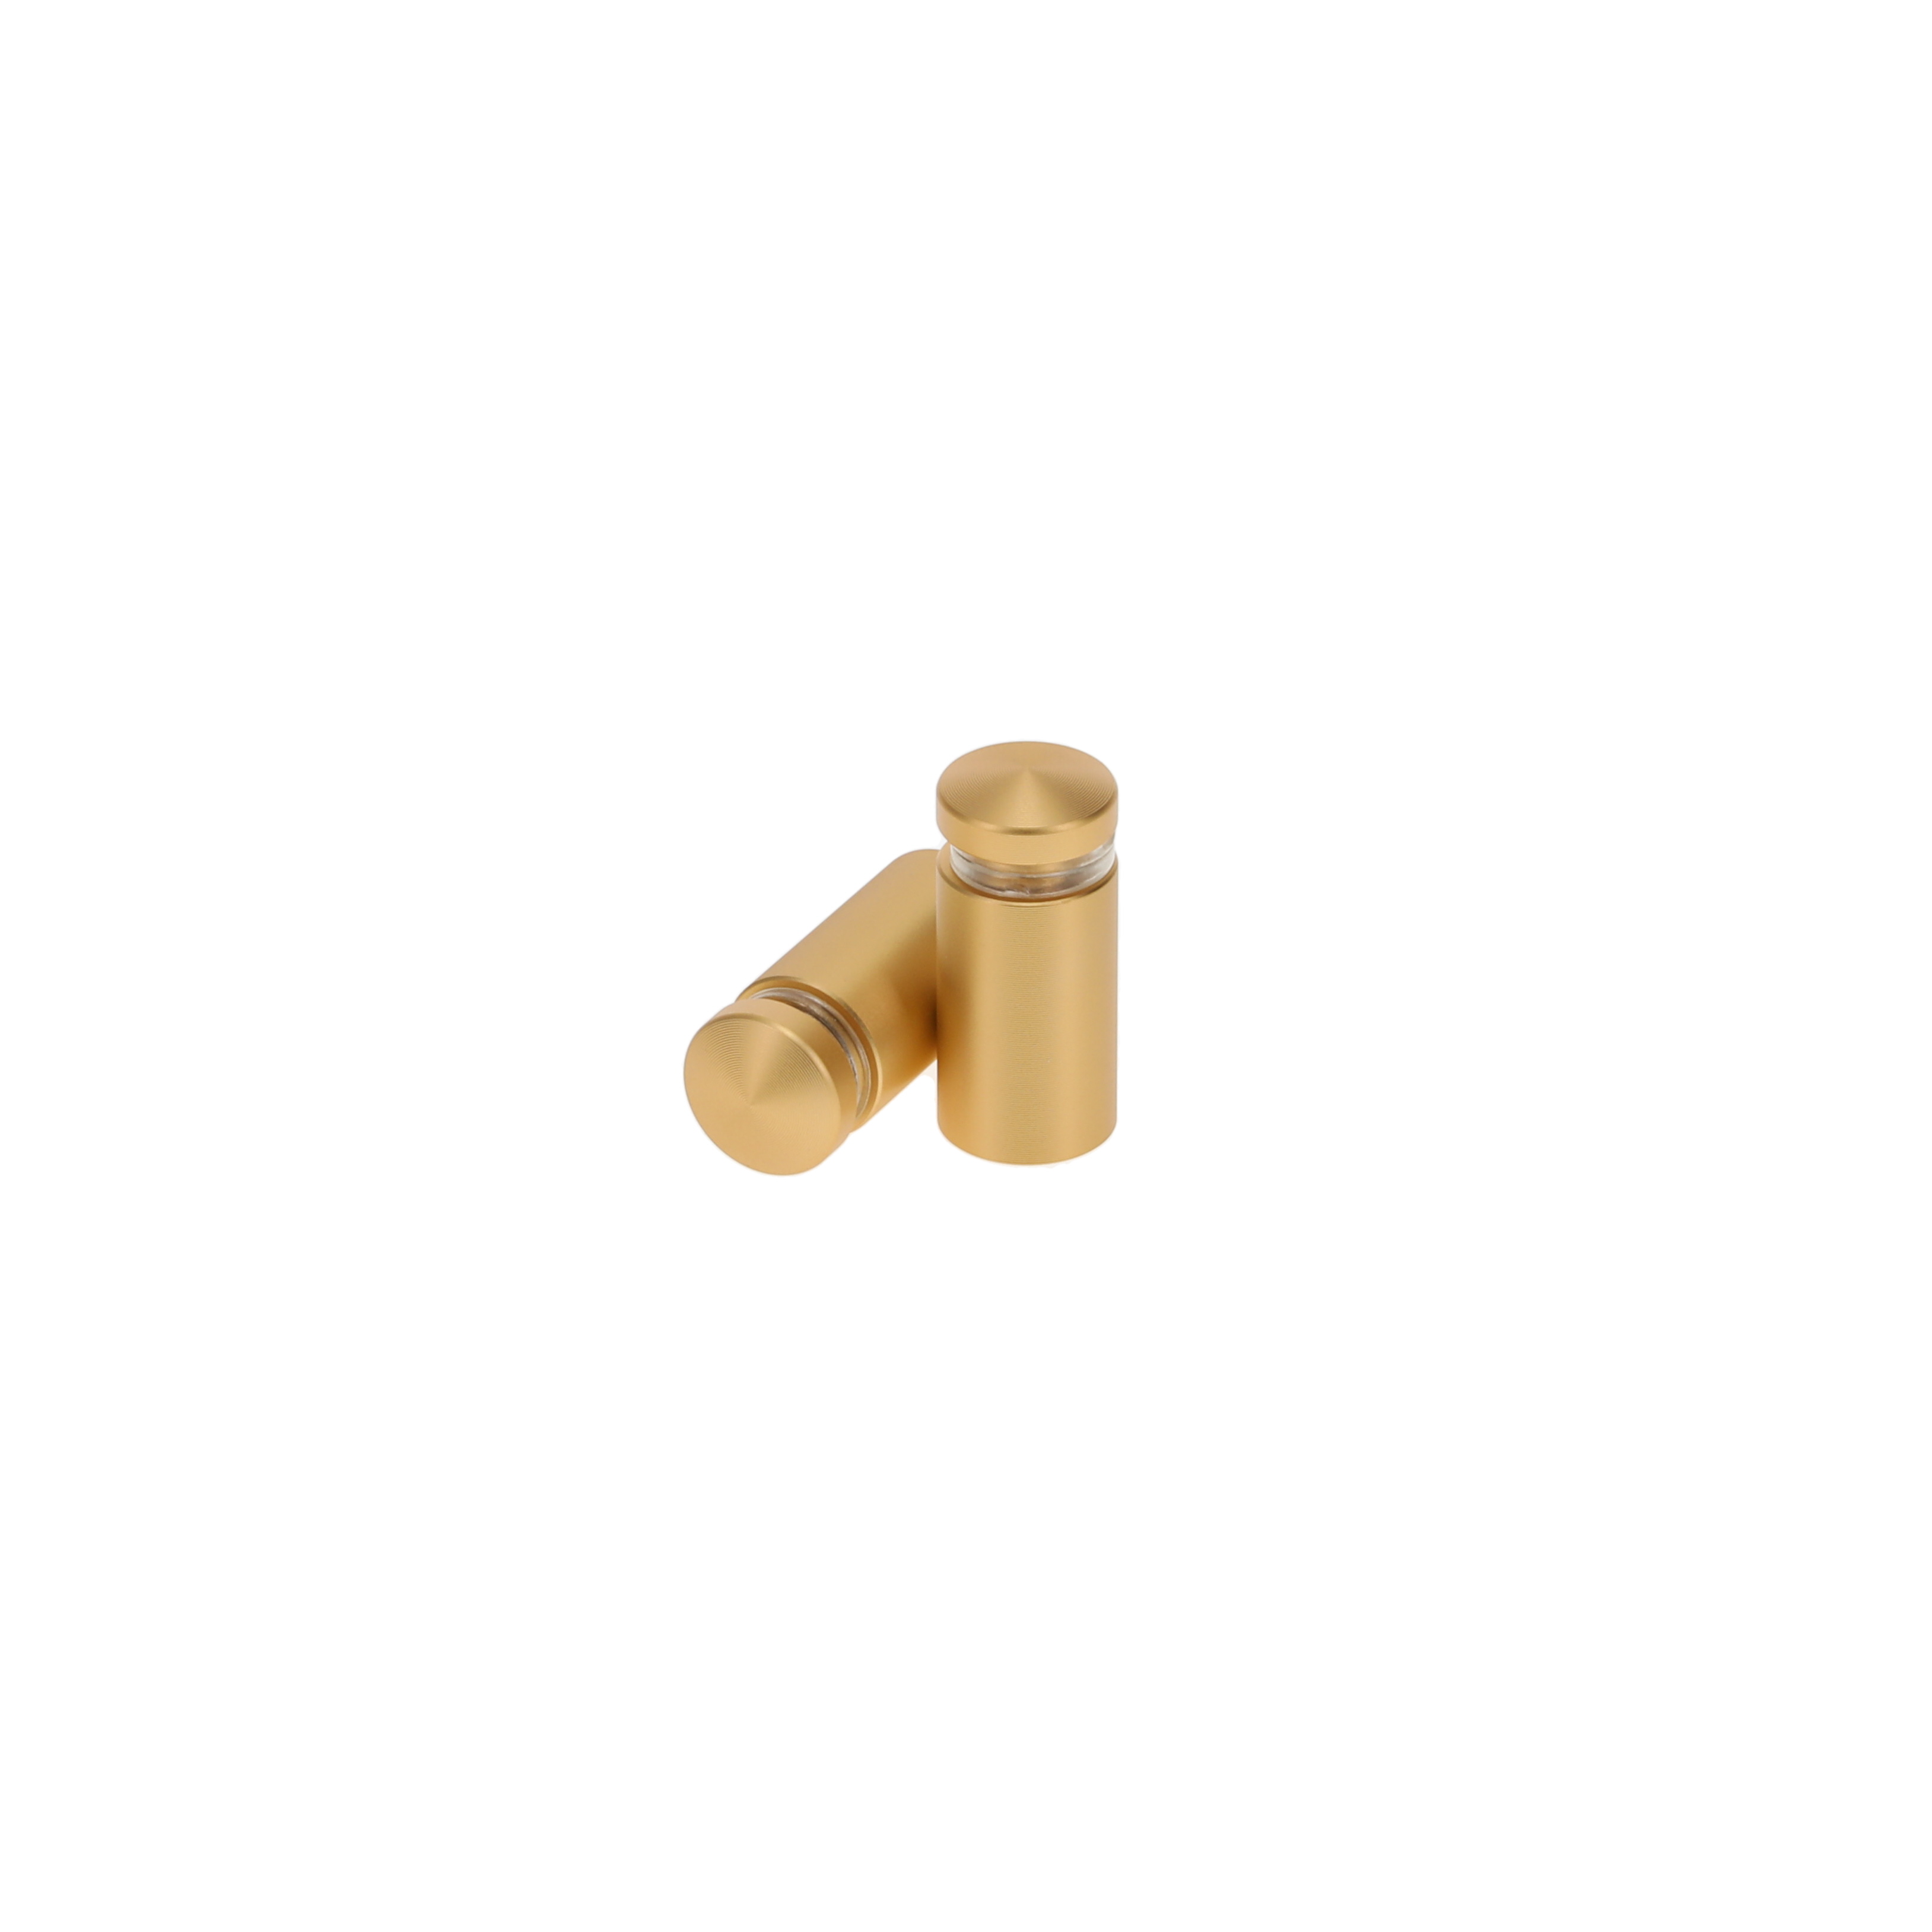 1/2'' Diameter X 3/4'' Barrel Length, Aluminum Rounded Head Standoffs, Matte Champagne Anodized Finish Easy Fasten Standoff (For Inside / Outside use) [Required Material Hole Size: 3/8'']